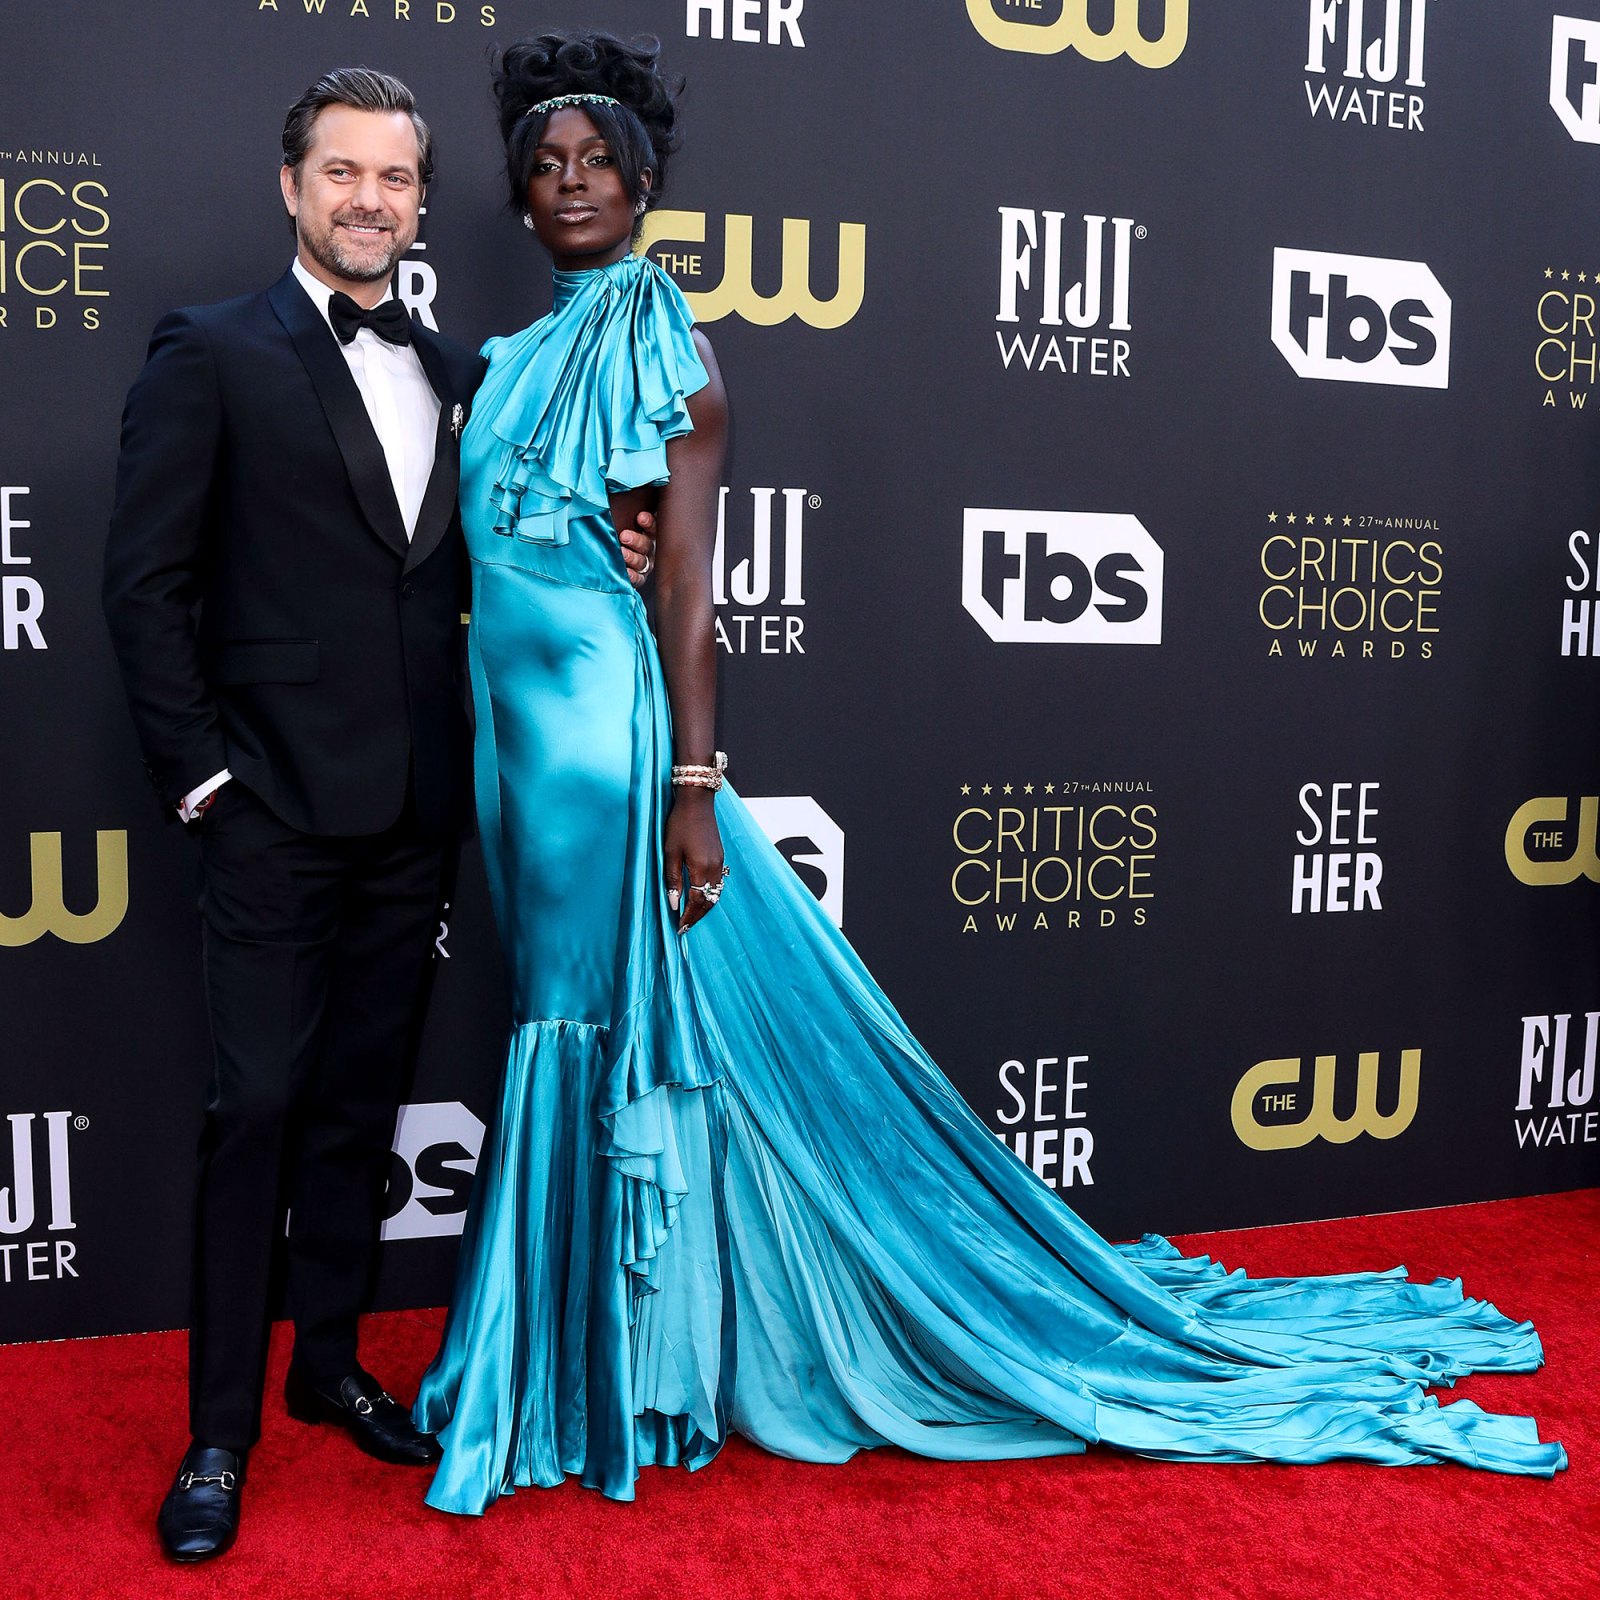 Joshua Jackson and Jodie Turner-Smith Hottest Couples on the Critics Choice Awards 2022 Red Carpet